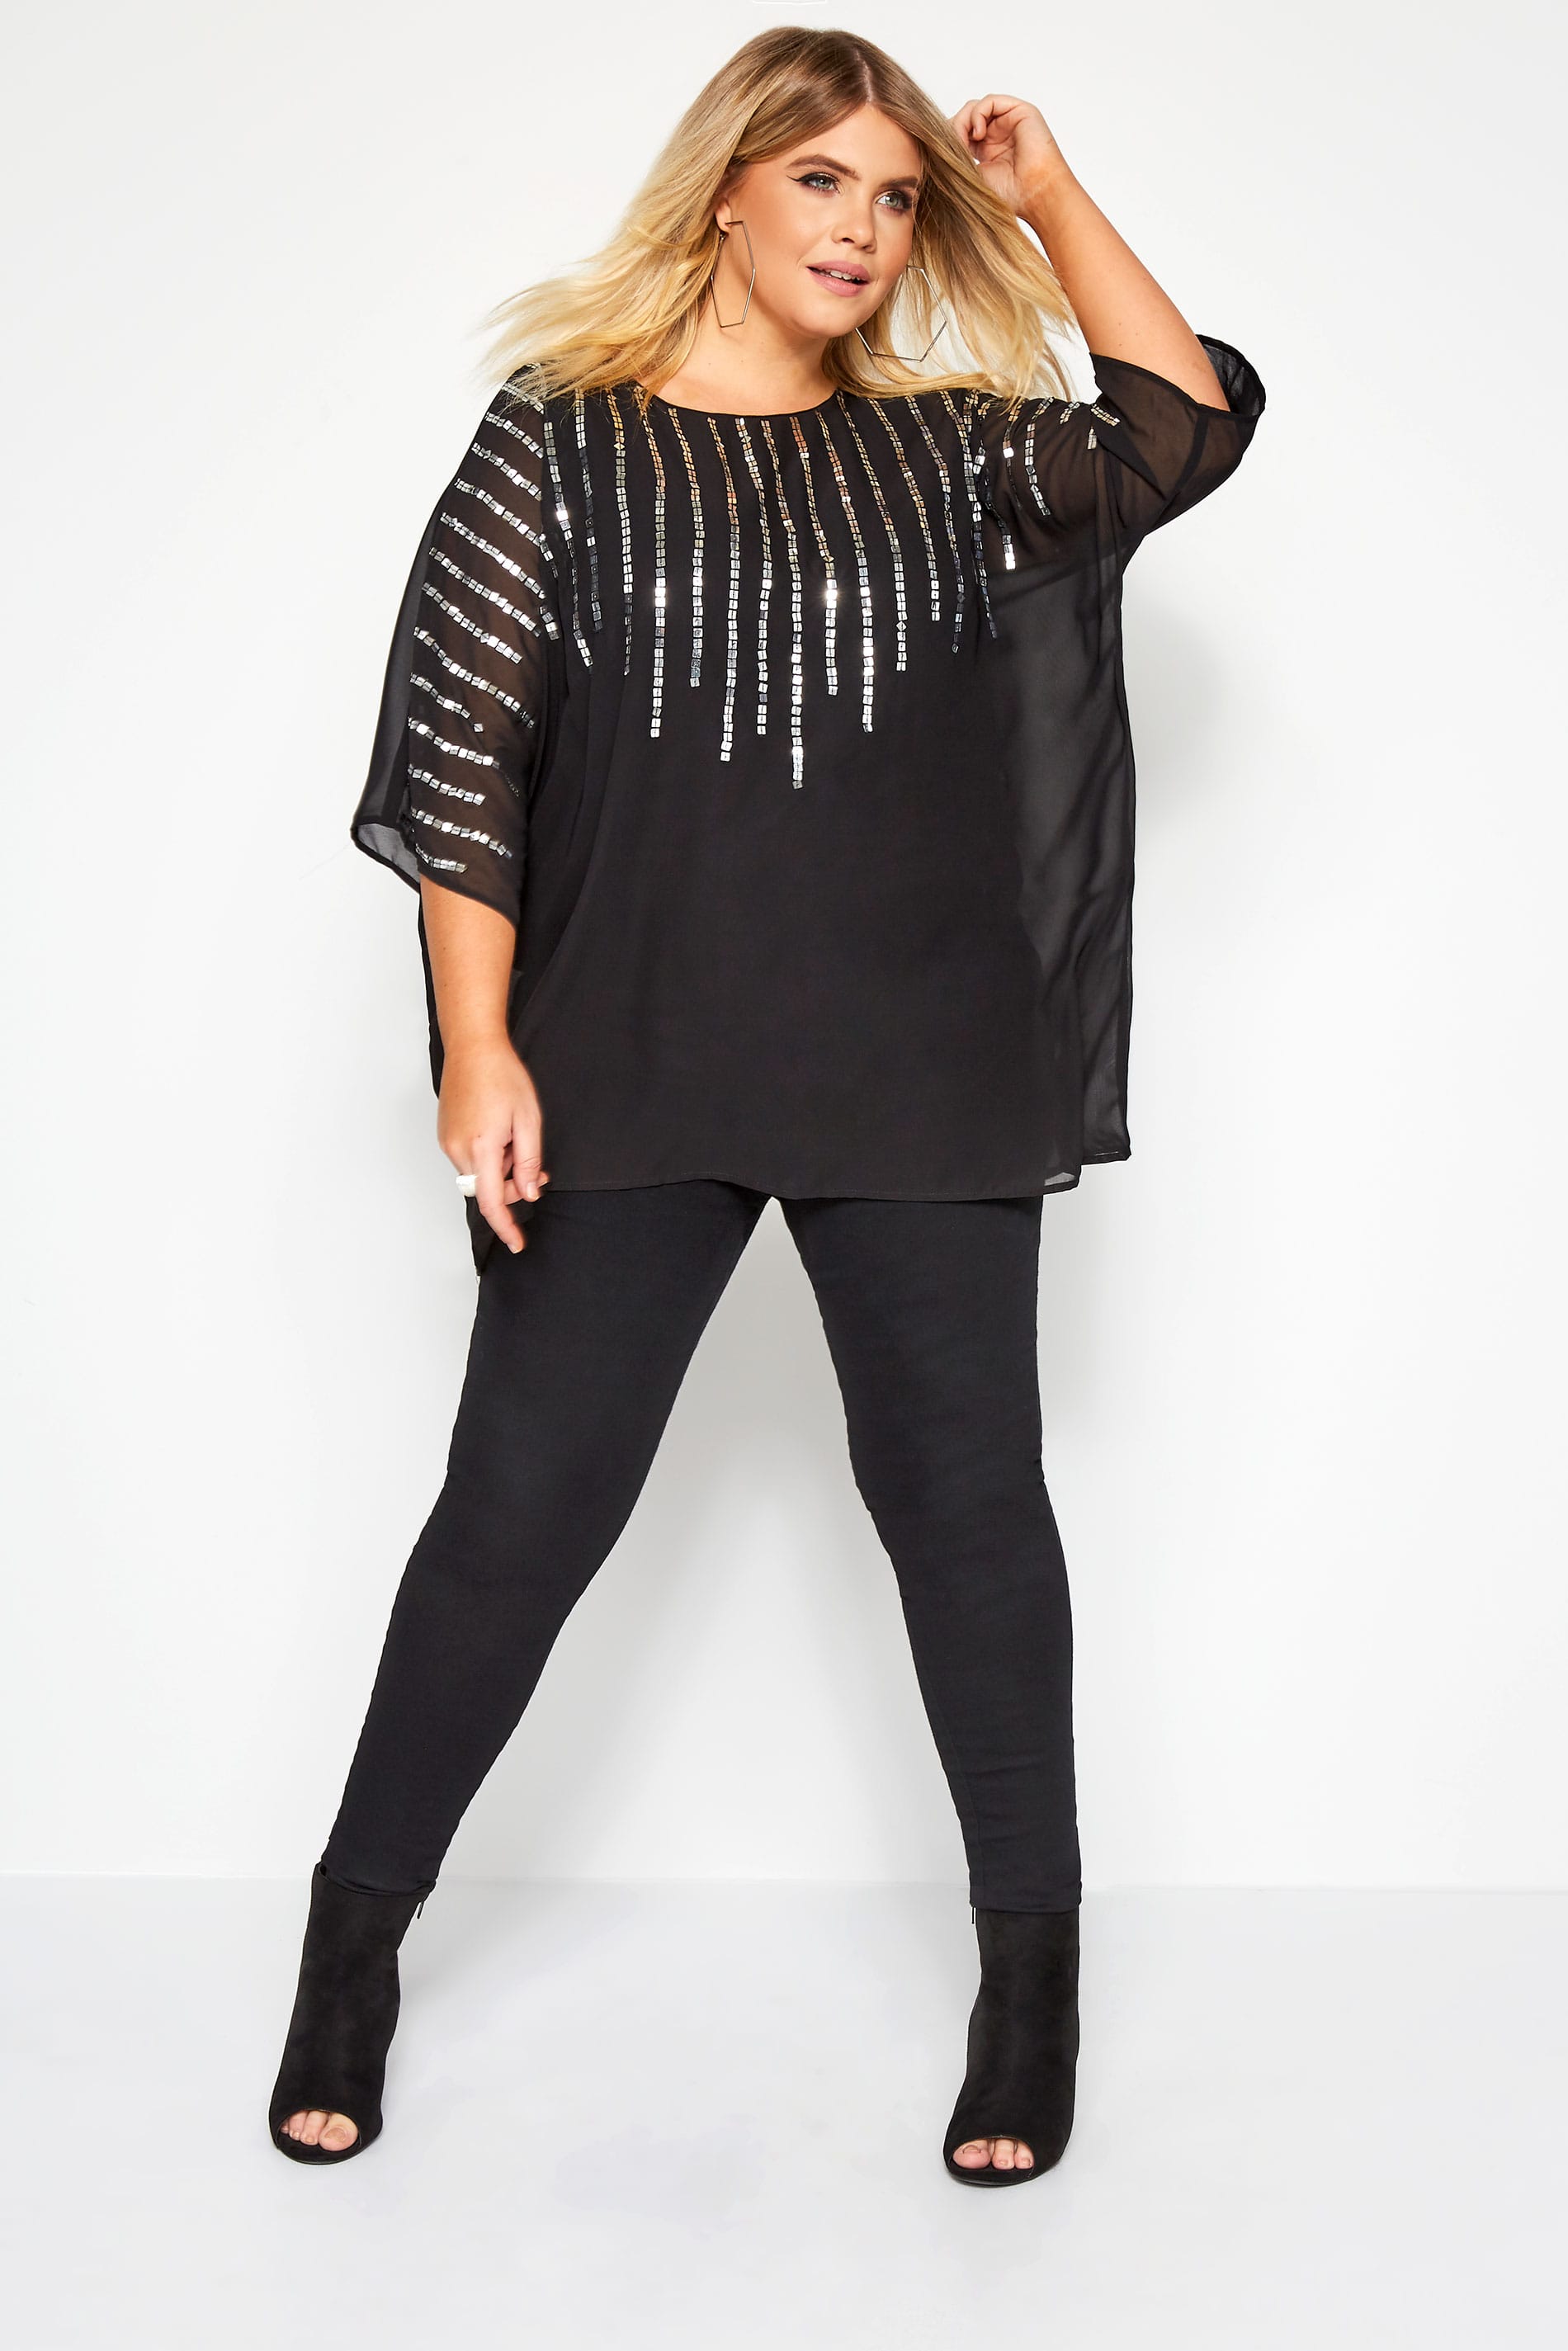 YOURS LONDON Black Square Sequin Cape Top | Yours Clothing 2